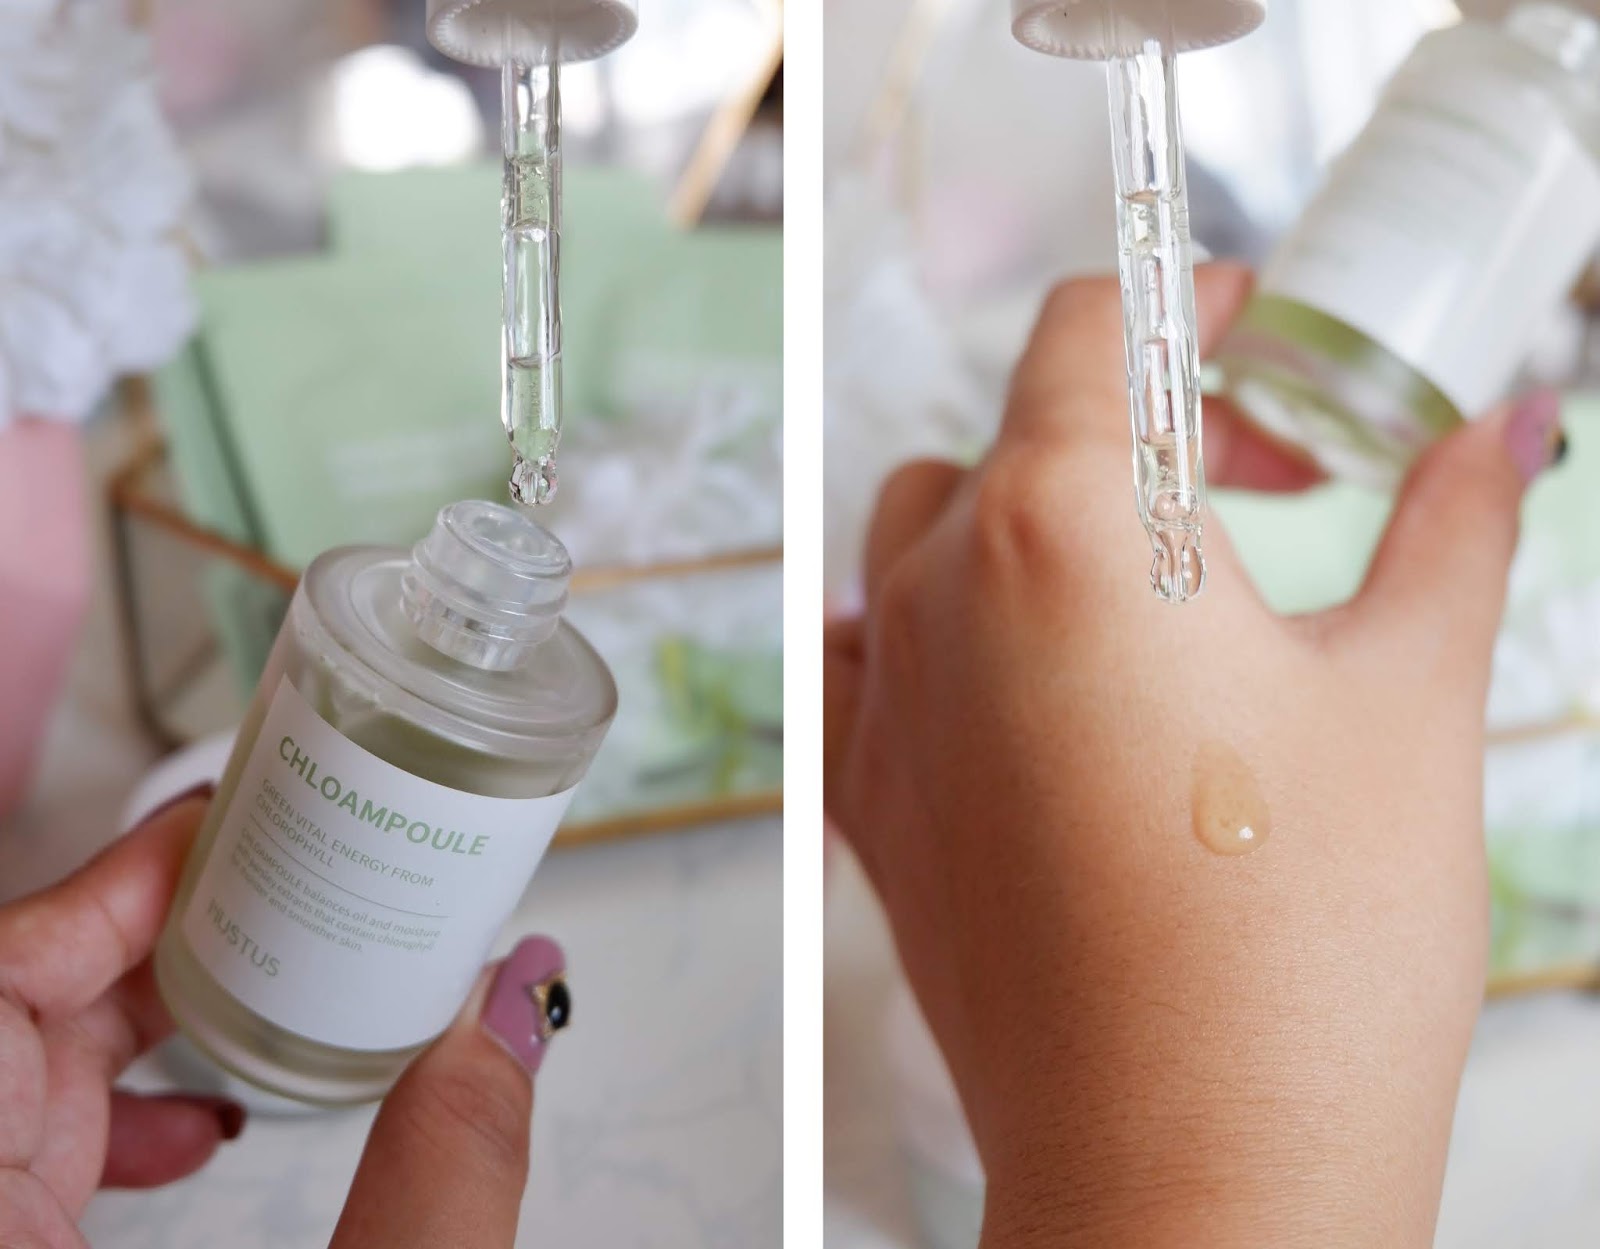 3 STEPS TO HAVE A CLEAR SKIN WITH MUSTUS CHLO AMPOULE / GEL CREAM/ GAUZE PEELING PAD